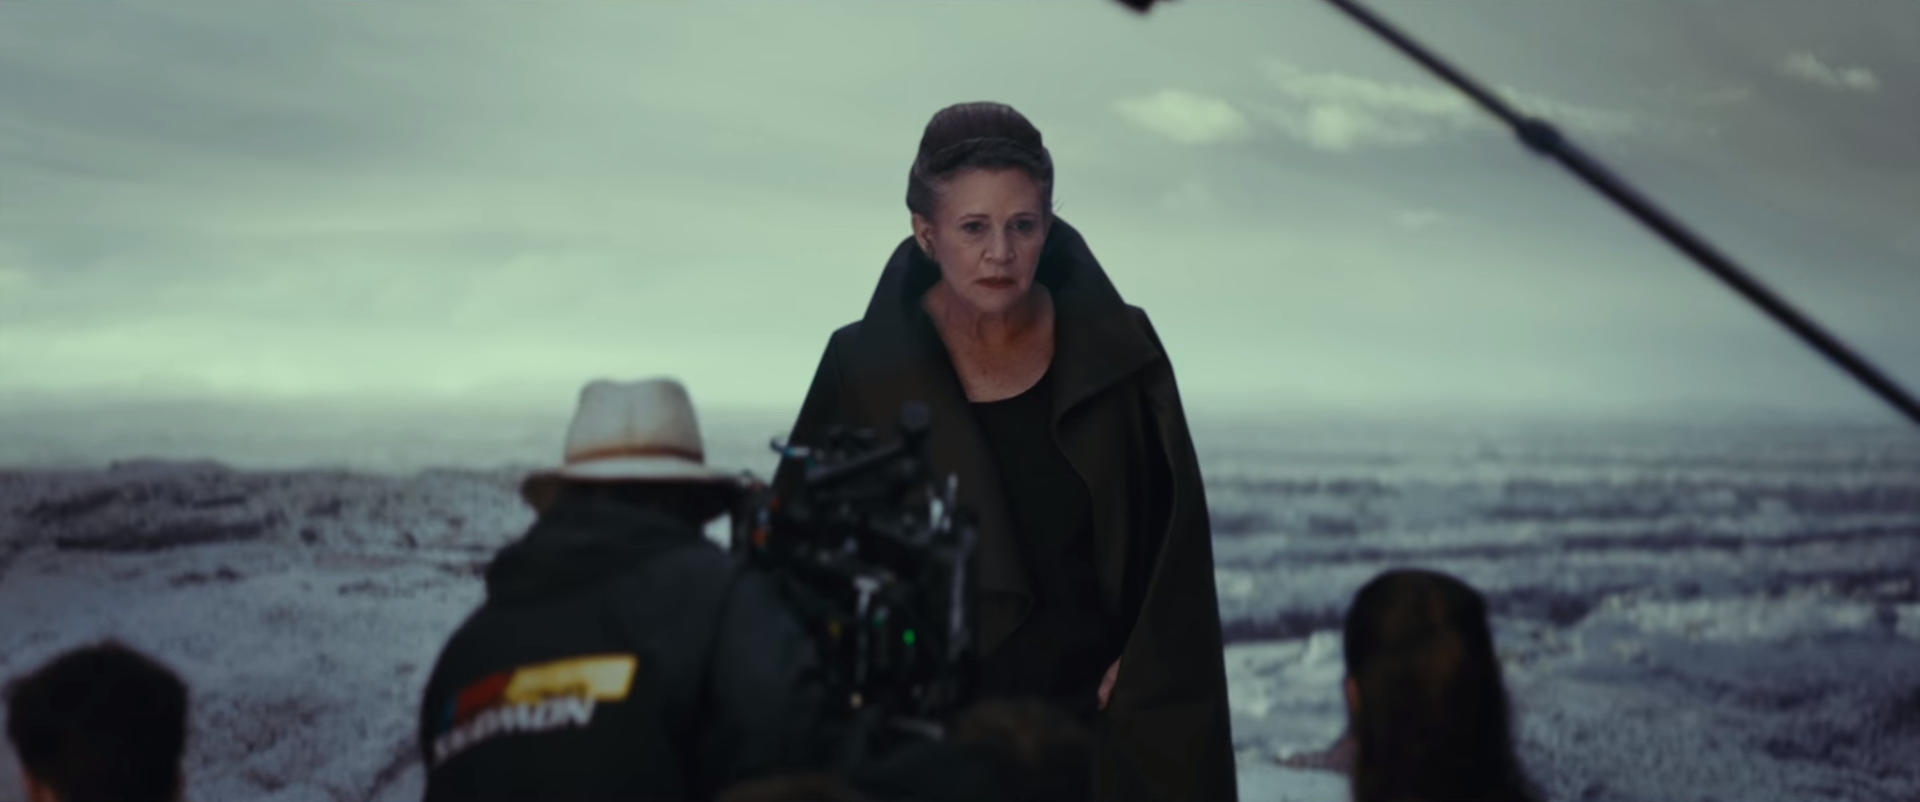 All The Details And Secrets We Spotted In The Latest Star Wars: The Last Jedi Footage